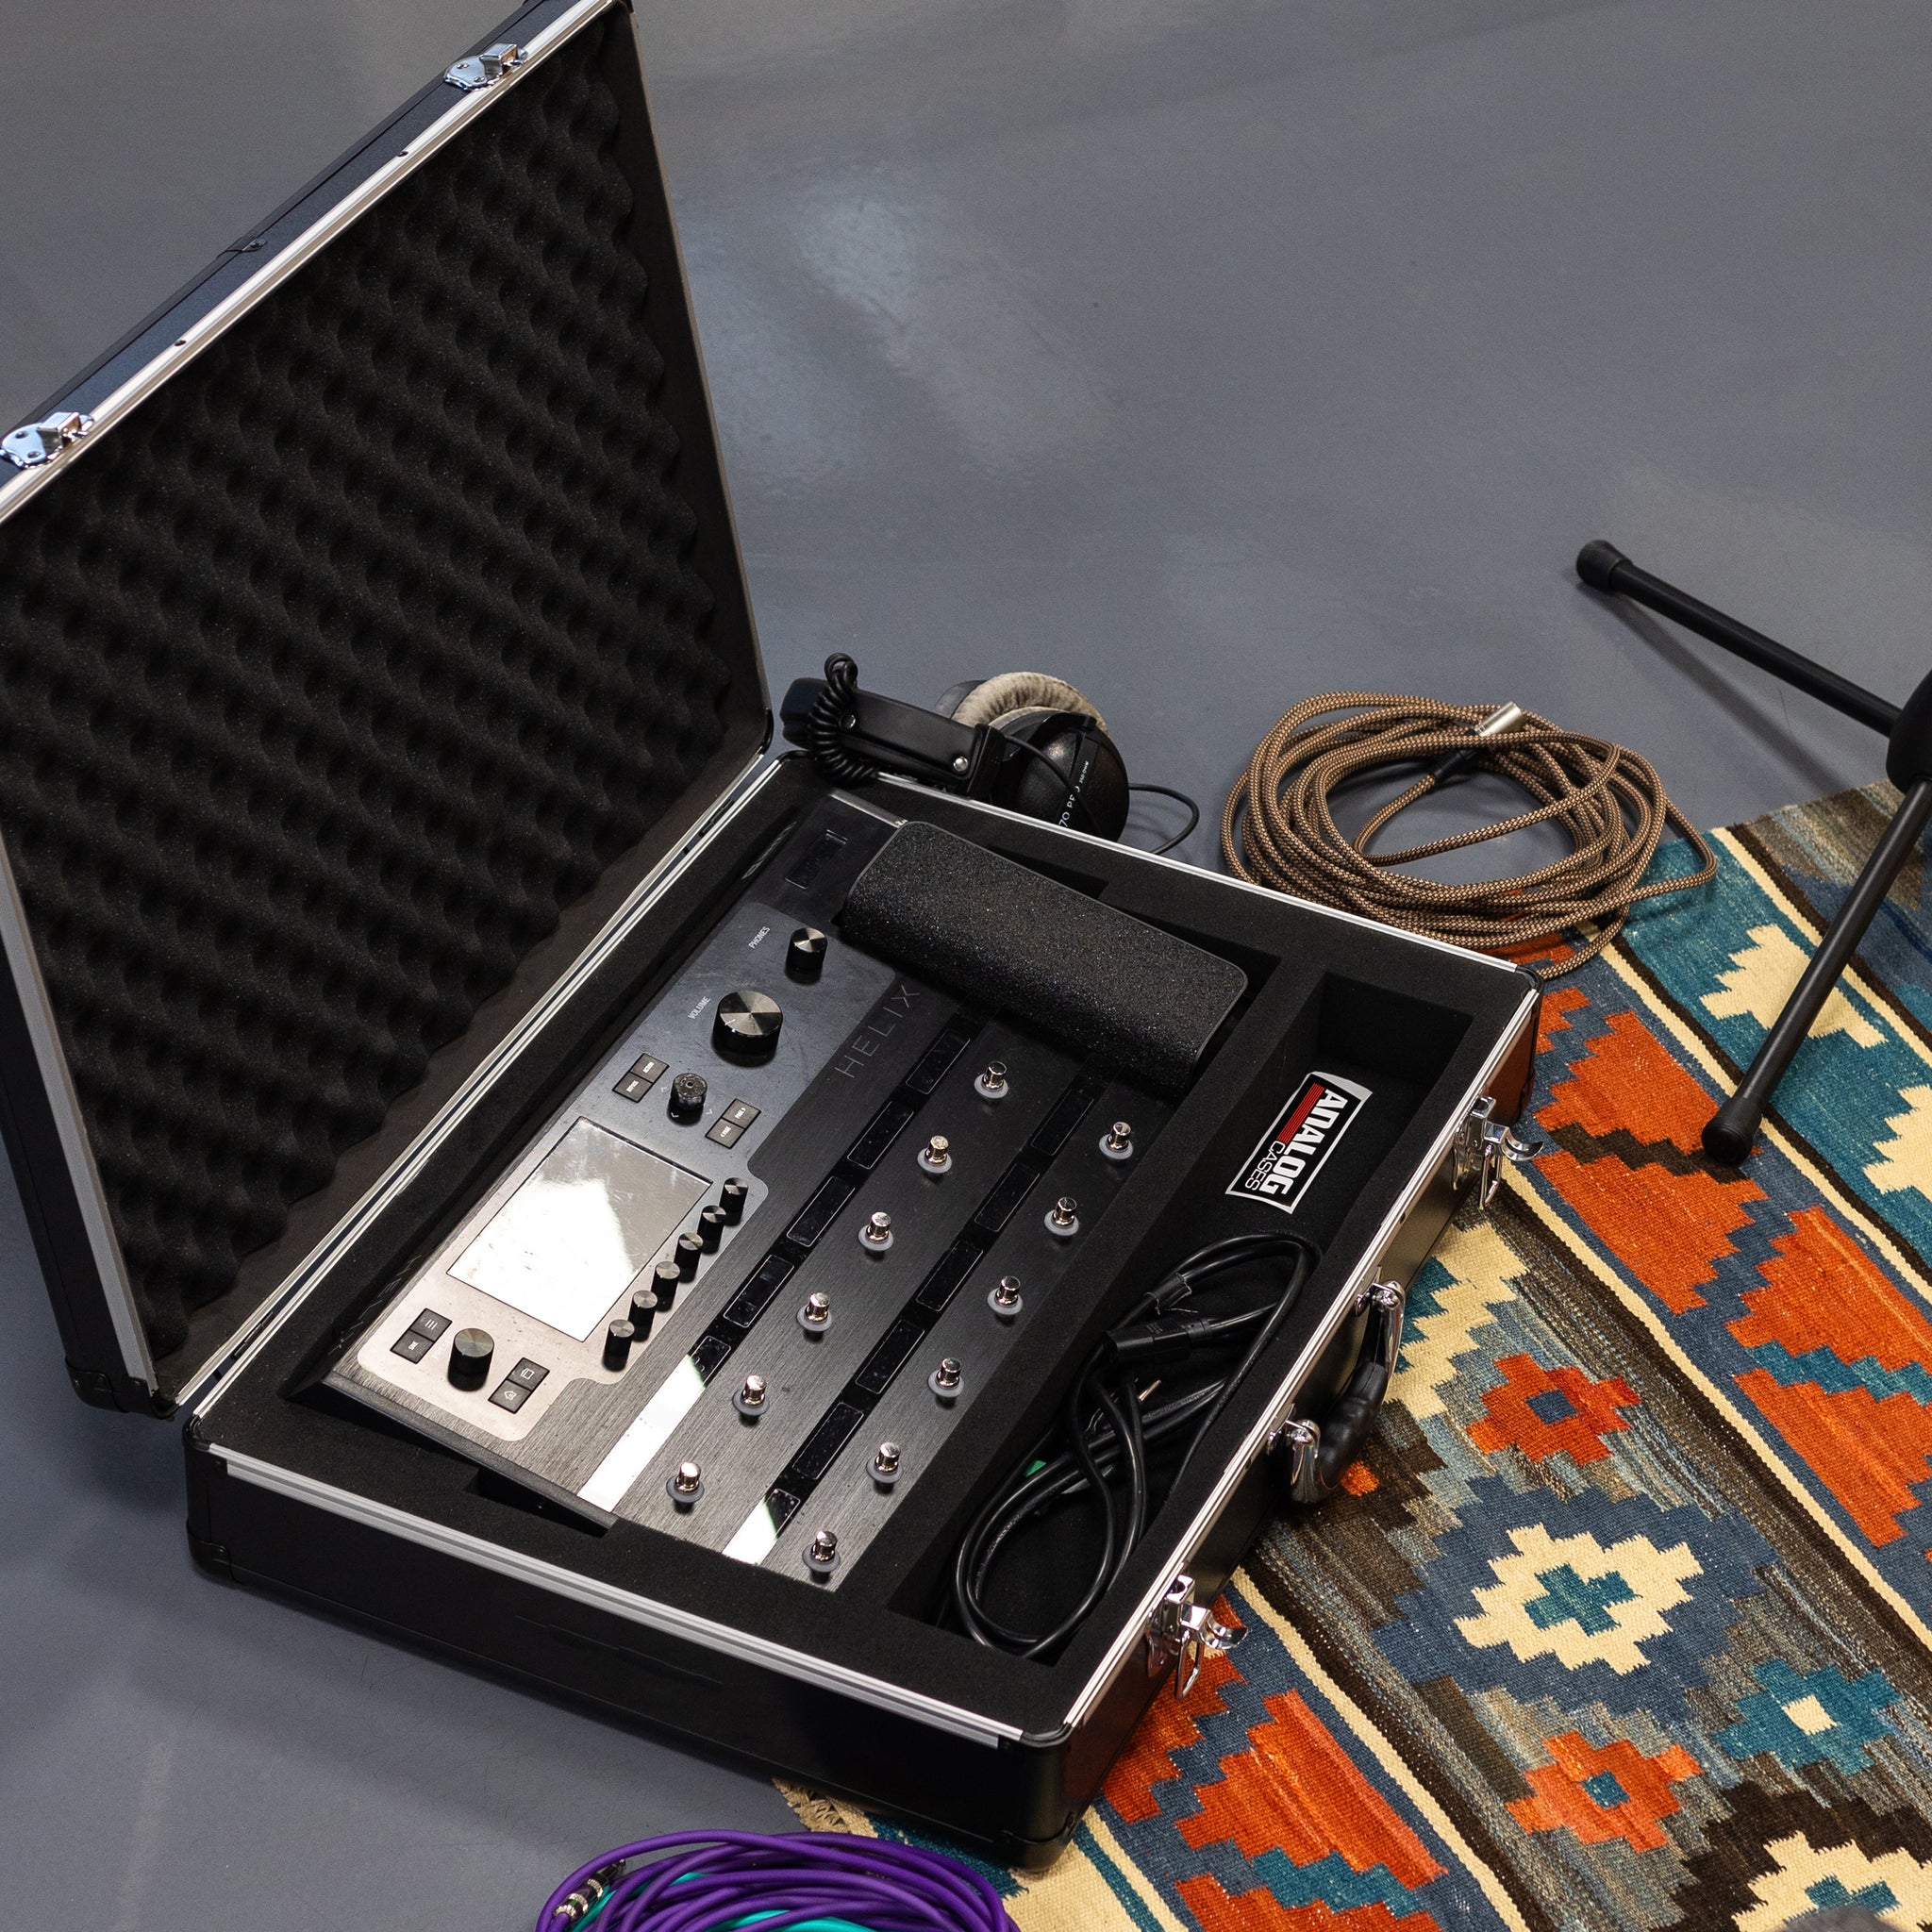 UNISON Case For The Line 6 Helix